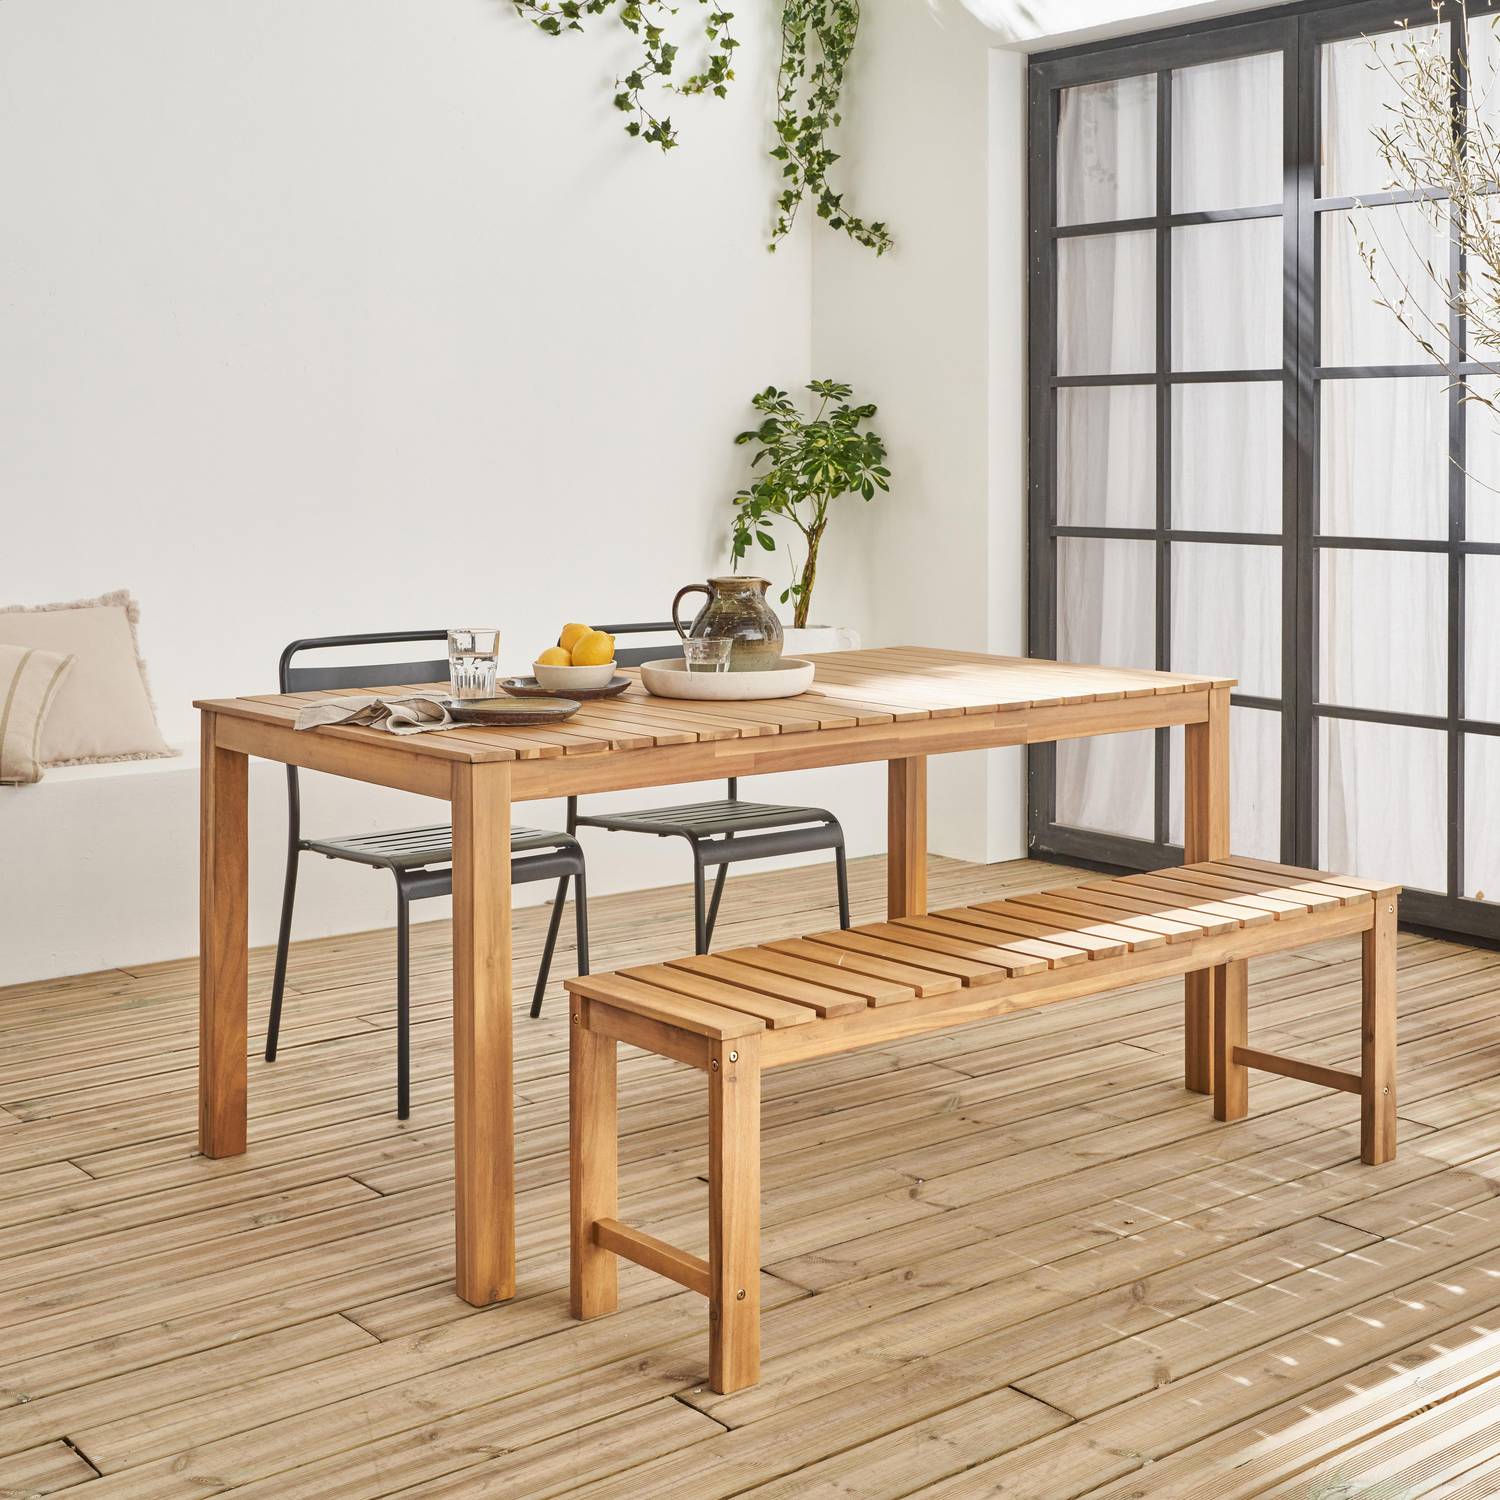 4 to 6-seater Indoor/outdoor table in acacia wood, 160cm, Cartama Photo4